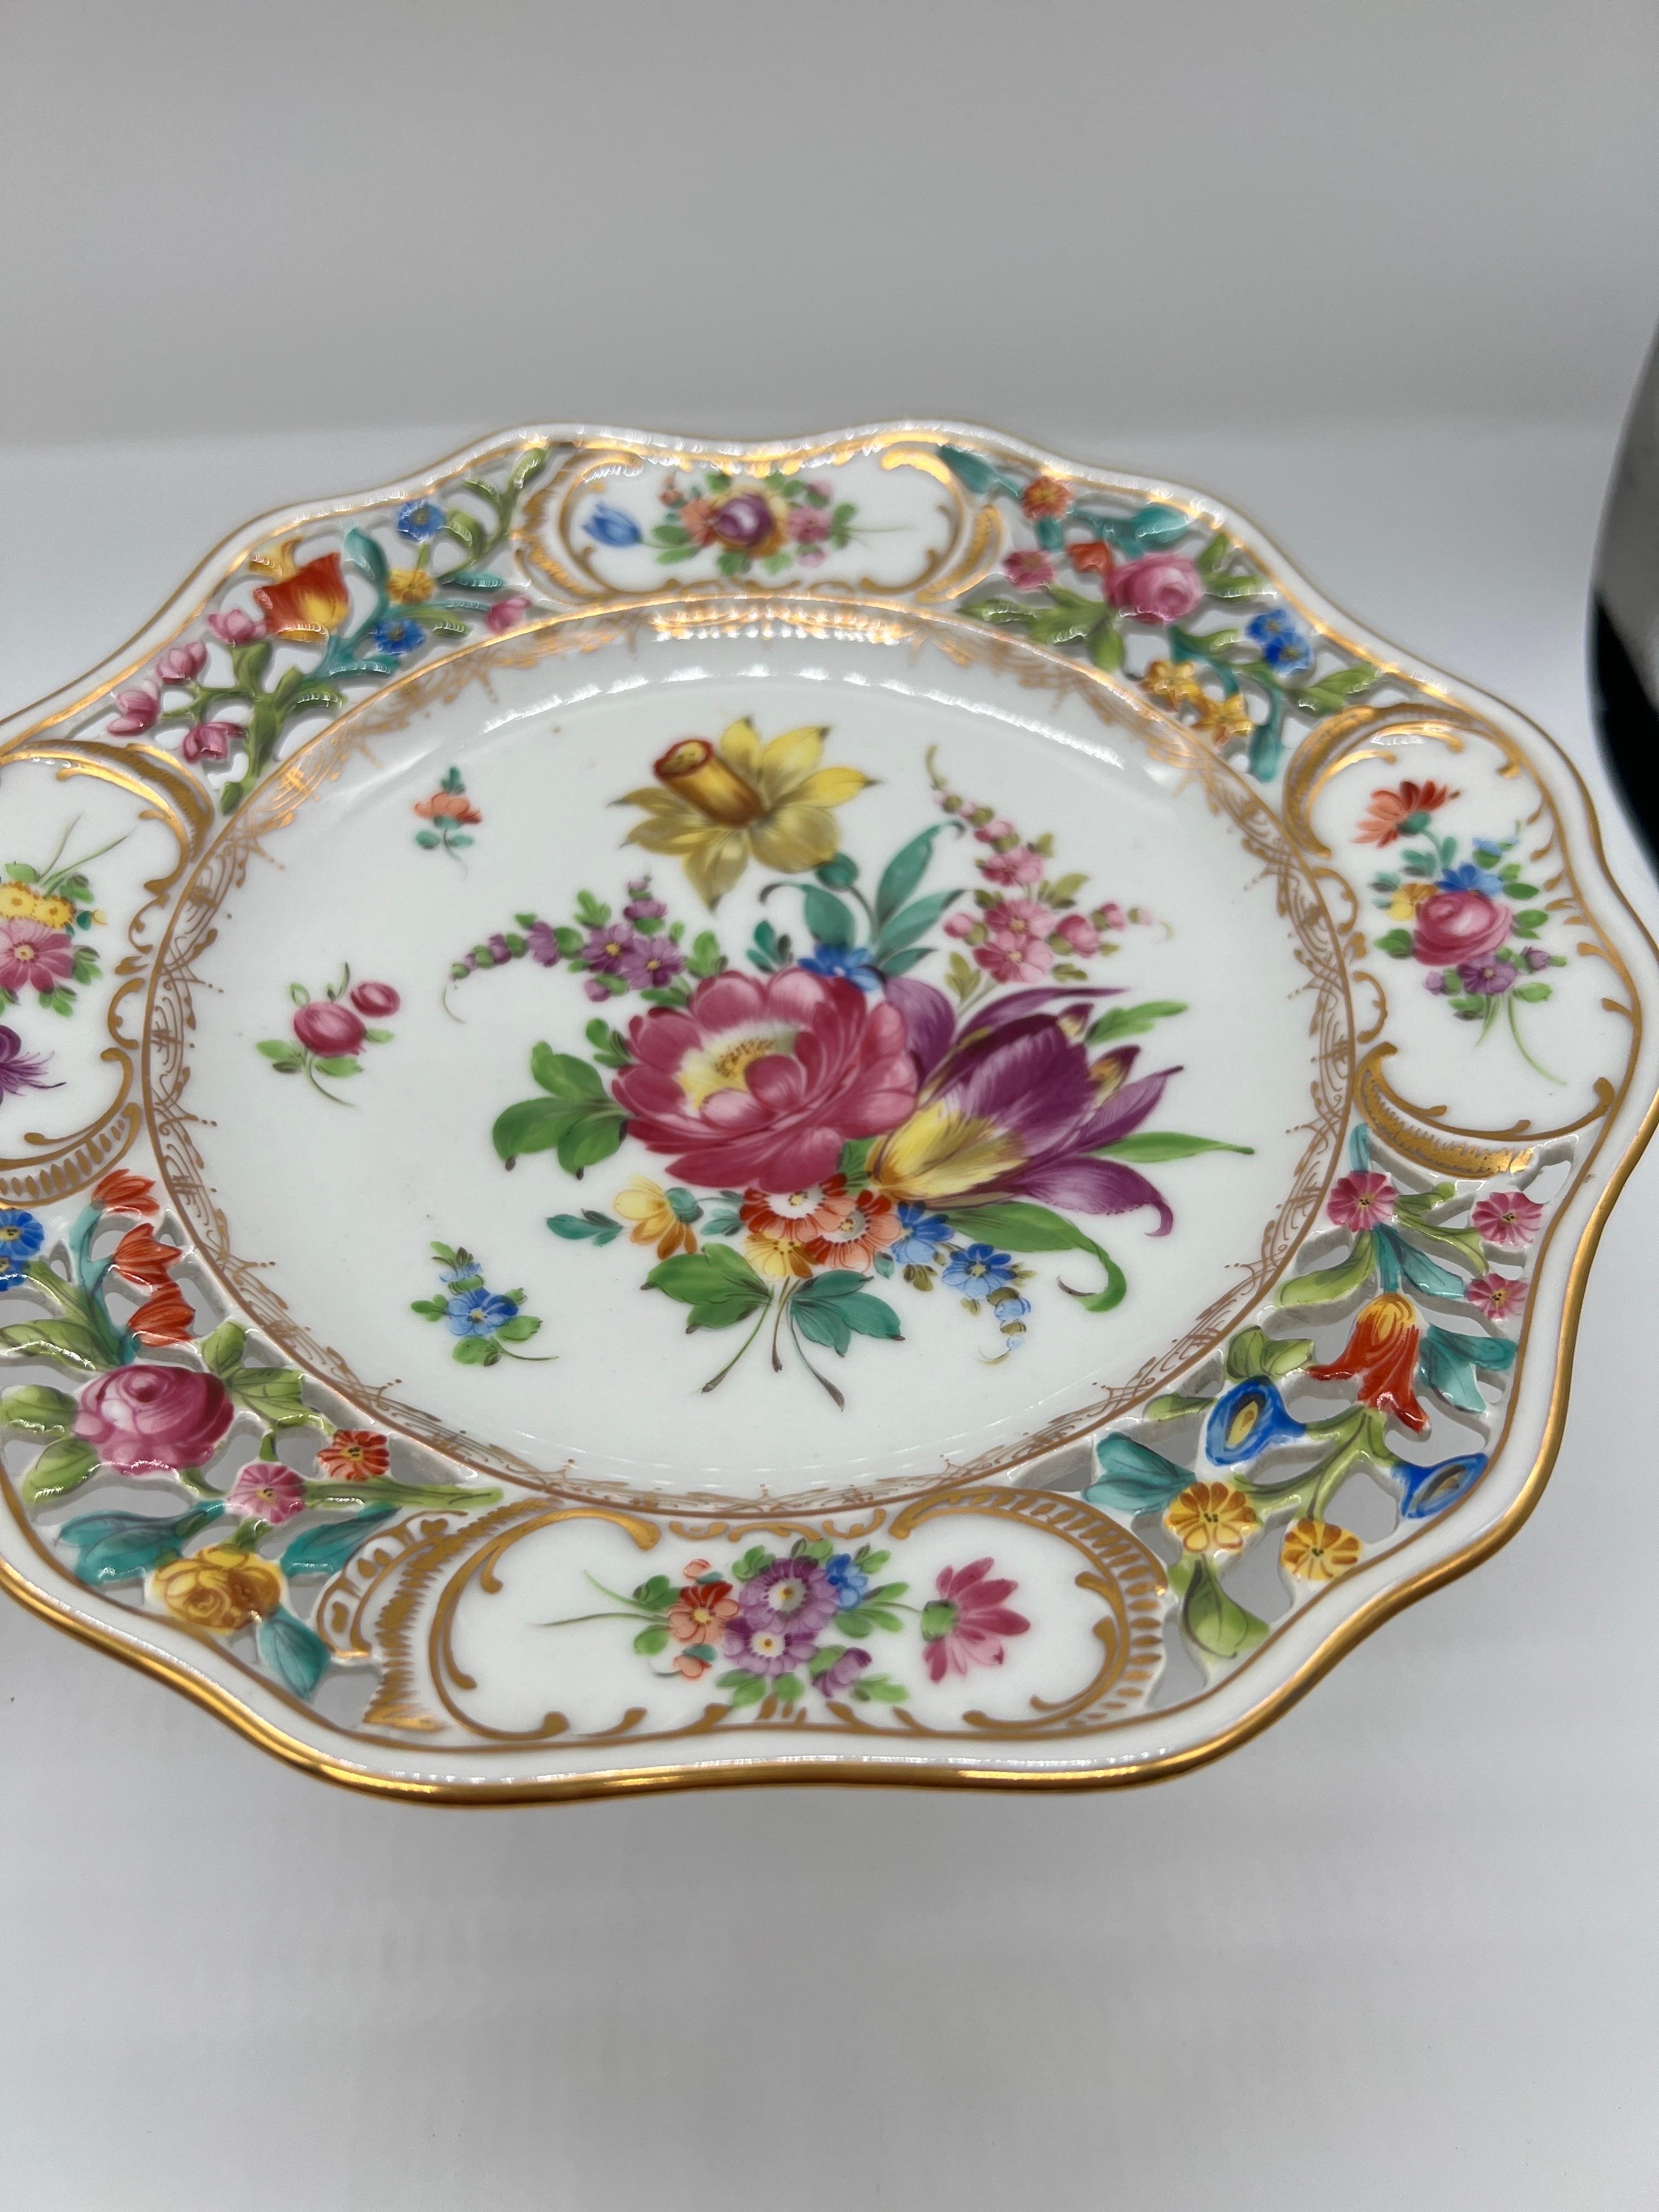 Dresden Germany, 20th century. 
A pair of antique compotes produced by the famous Dresden porcelain factory. Each compote is hand painted and decorated with a vast floral color array to the pierced edges and a finely decorated central foliate motif.